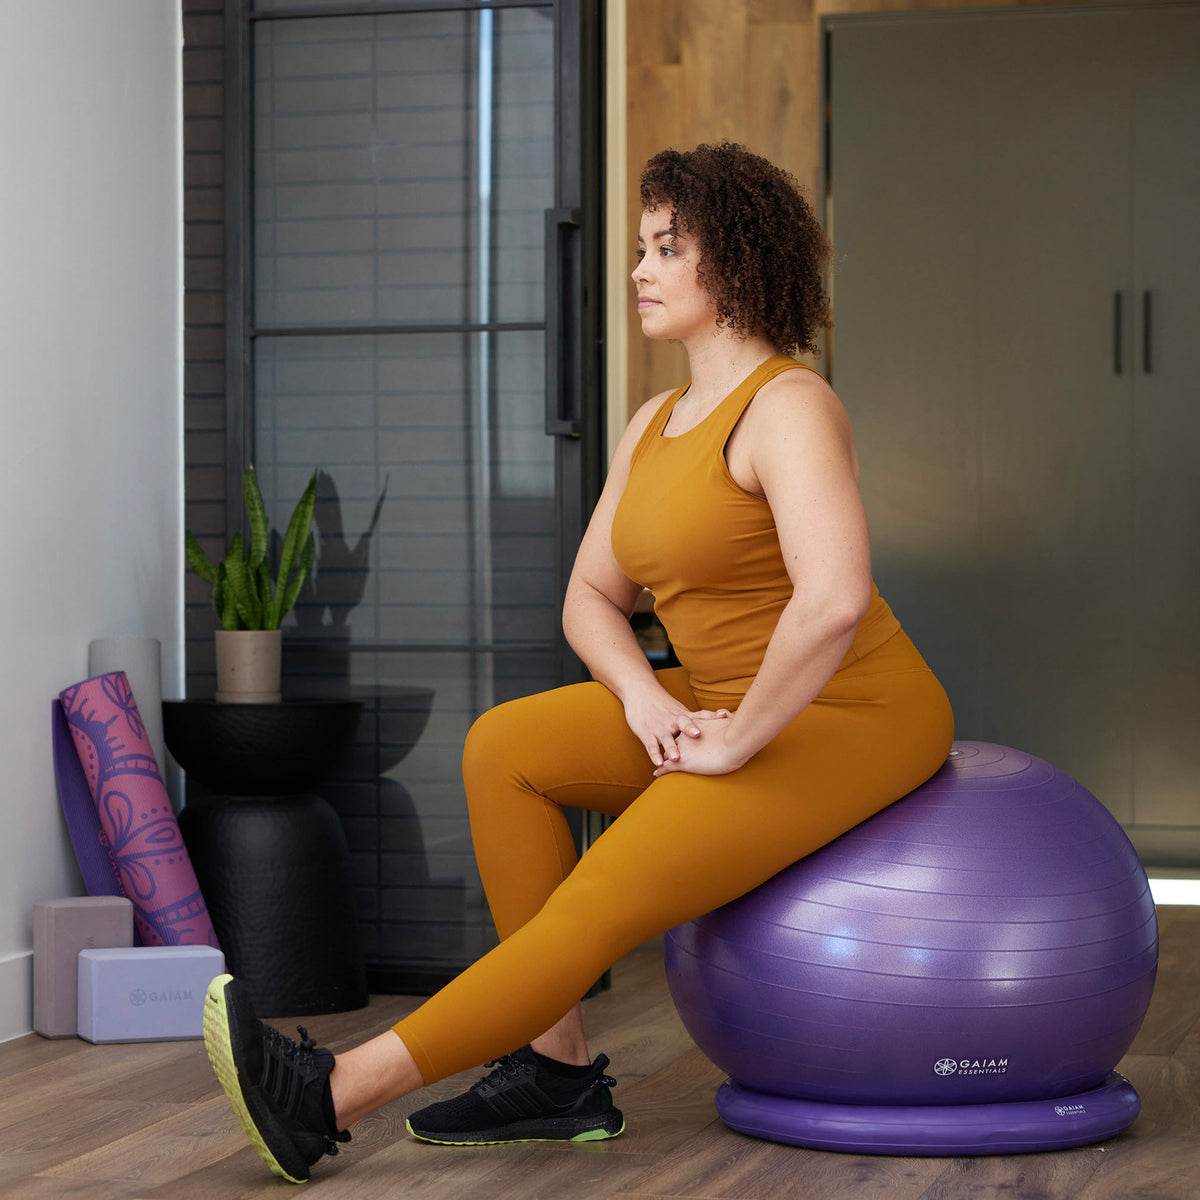 Woman seated on exercise ball stretching hamstring